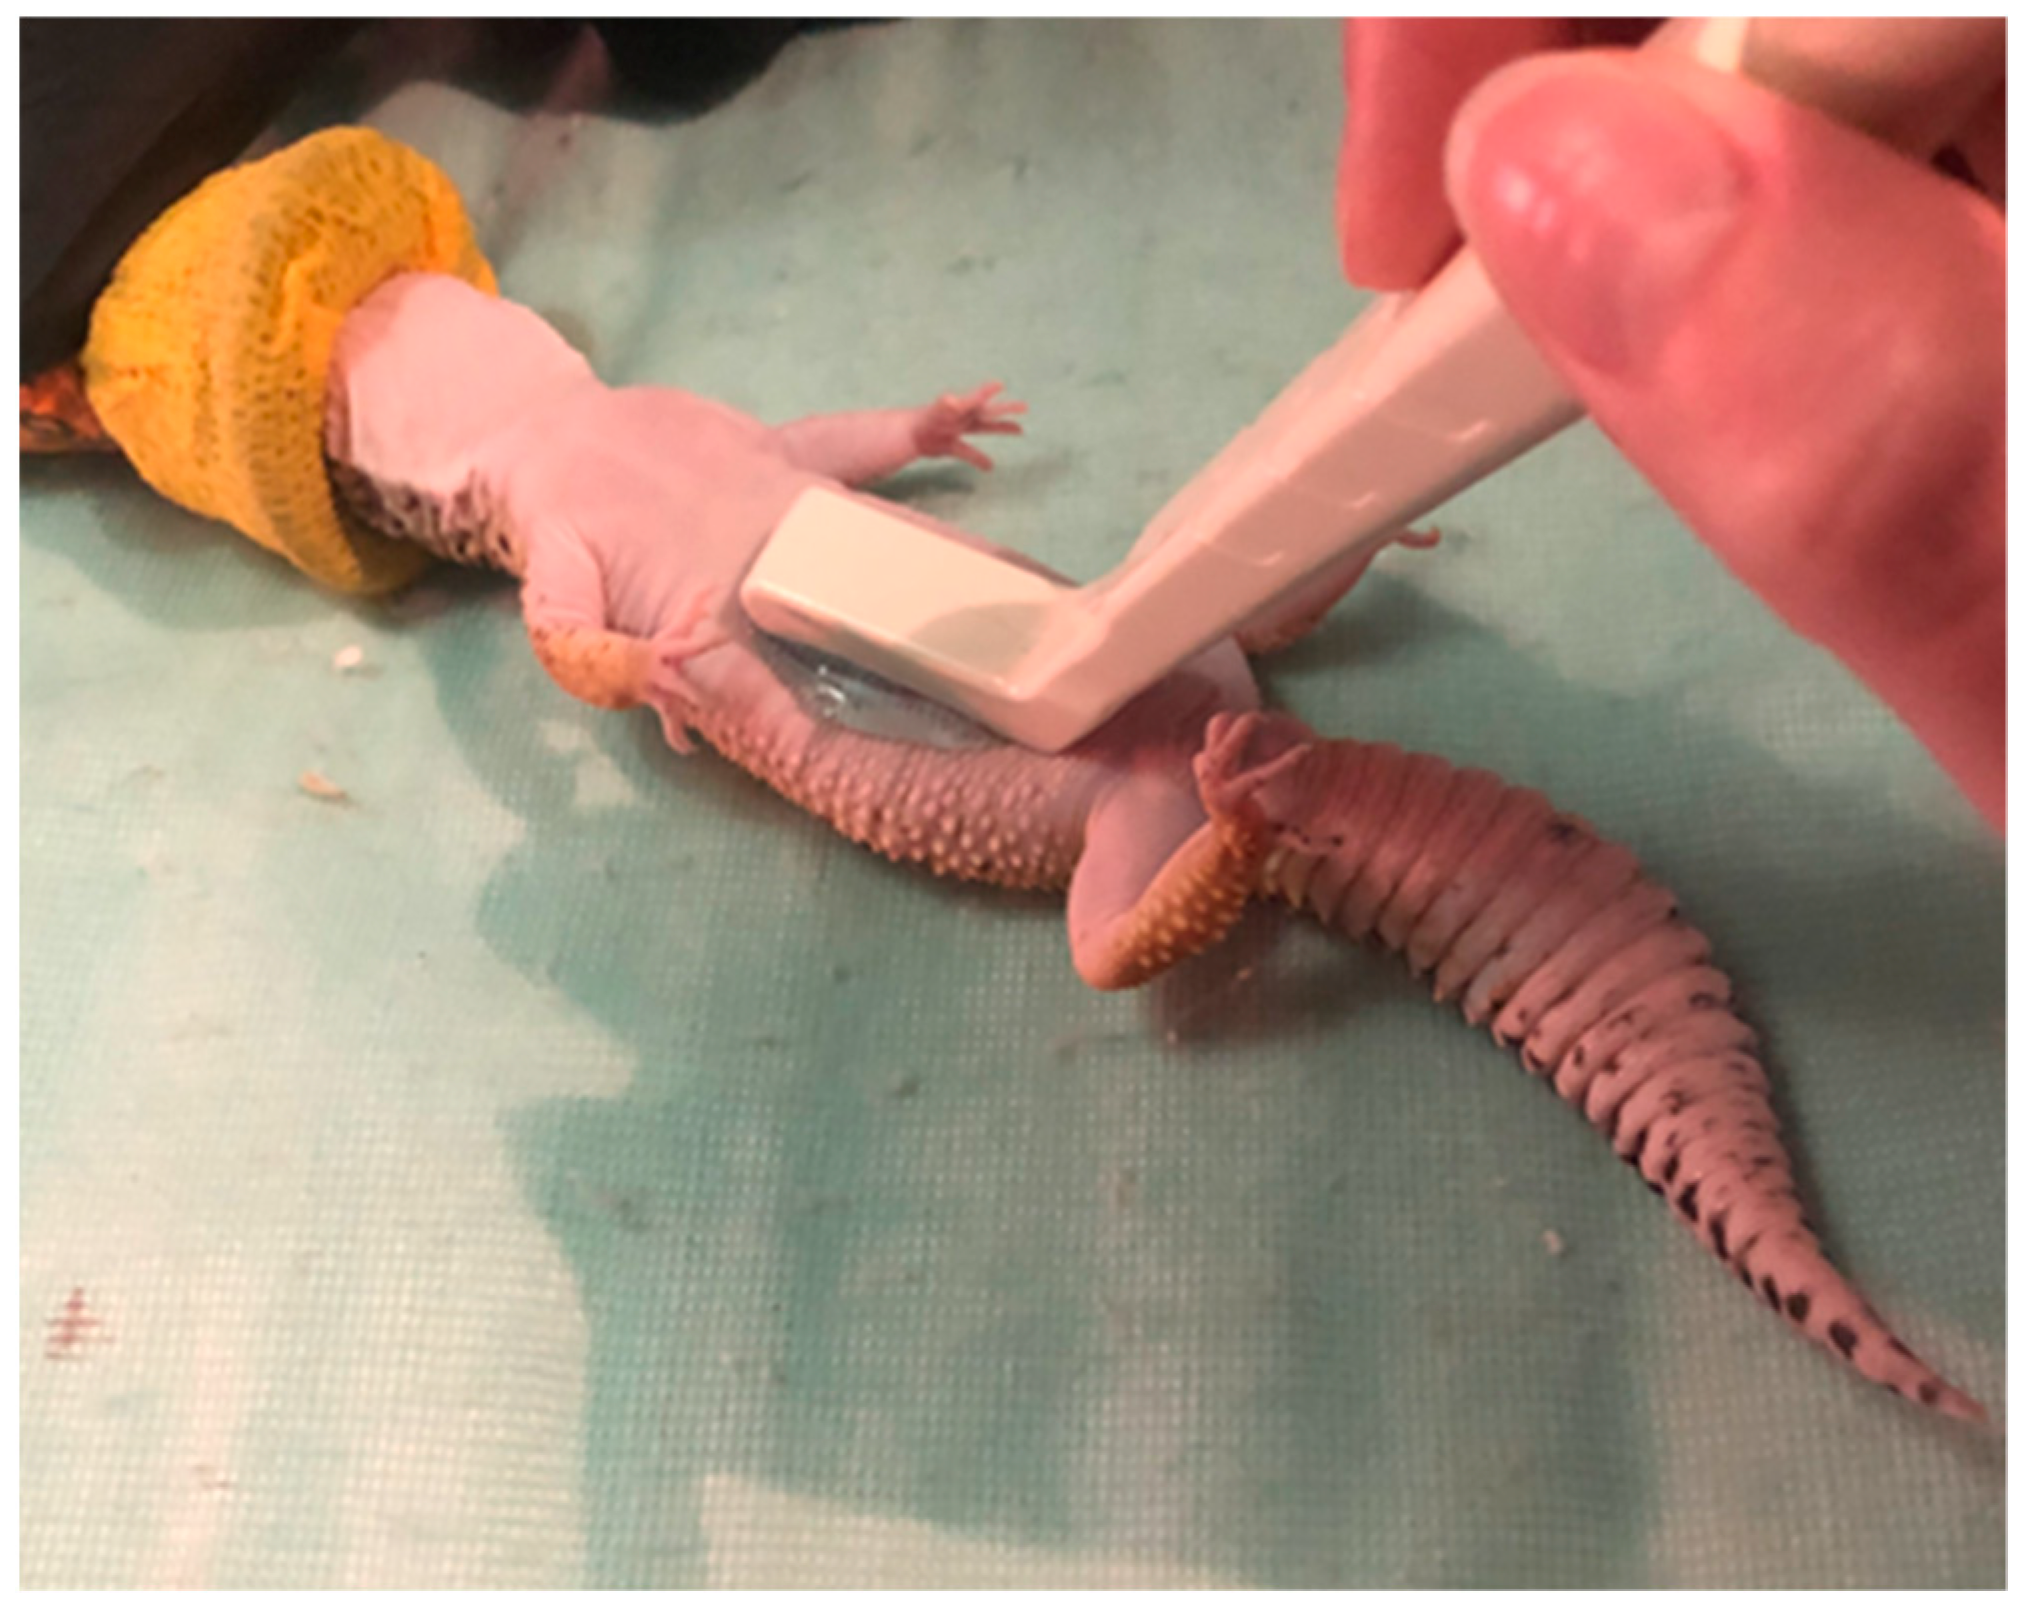 Animals | Free Full-Text | Determining the Effects of Serial Injections of  Pregnant Mare Serum Gonadotropin on Plasma Testosterone Concentrations,  Testicular Dynamics, and Semen Production in Leopard Geckos (Eublepharis  macularius)